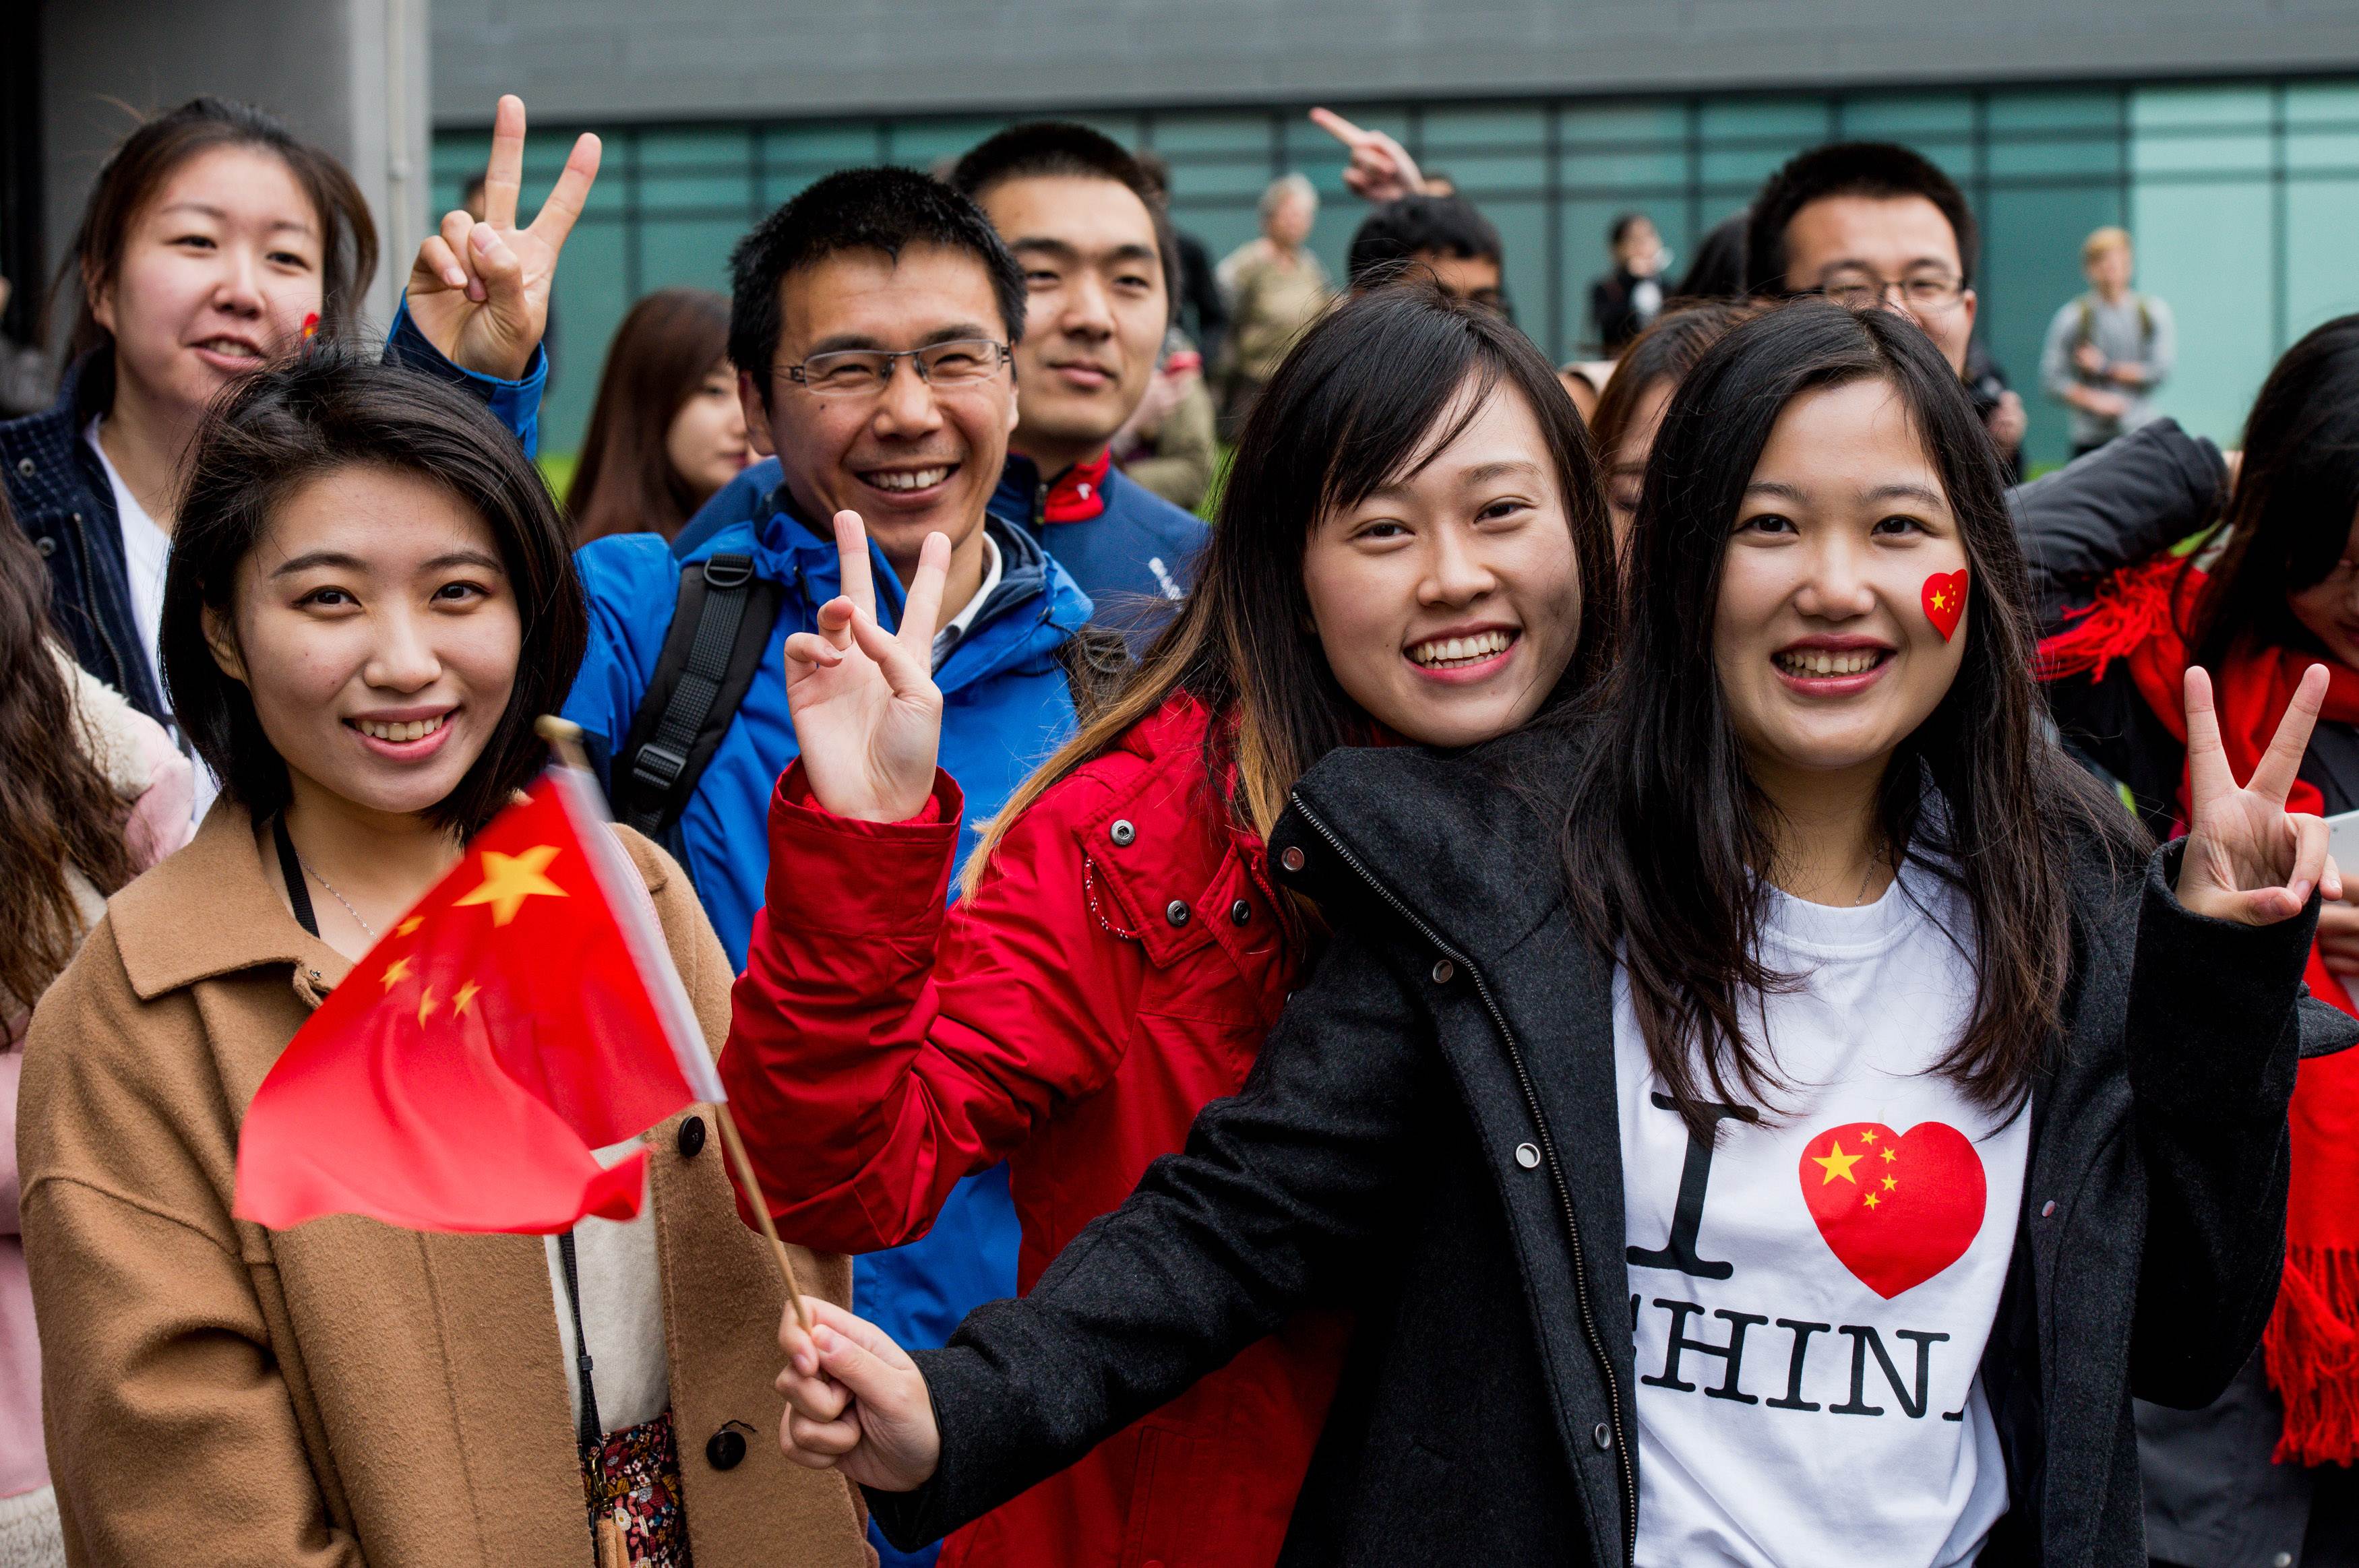 Chinese students show support for Chinese President Xi Jinping as he arrives to tour the National Graphene Institute at Manchester University with Britain's Chancellor of the Exchequer George Osborne on October 23, 2015 in Manchester, north west England. Chinese President Xi Jinping blew the final whistle on his state visit to Britain today with a day out at the English Premier League leaders Manchester City. AFP PHOTO / POOL / Richard Stonehouse